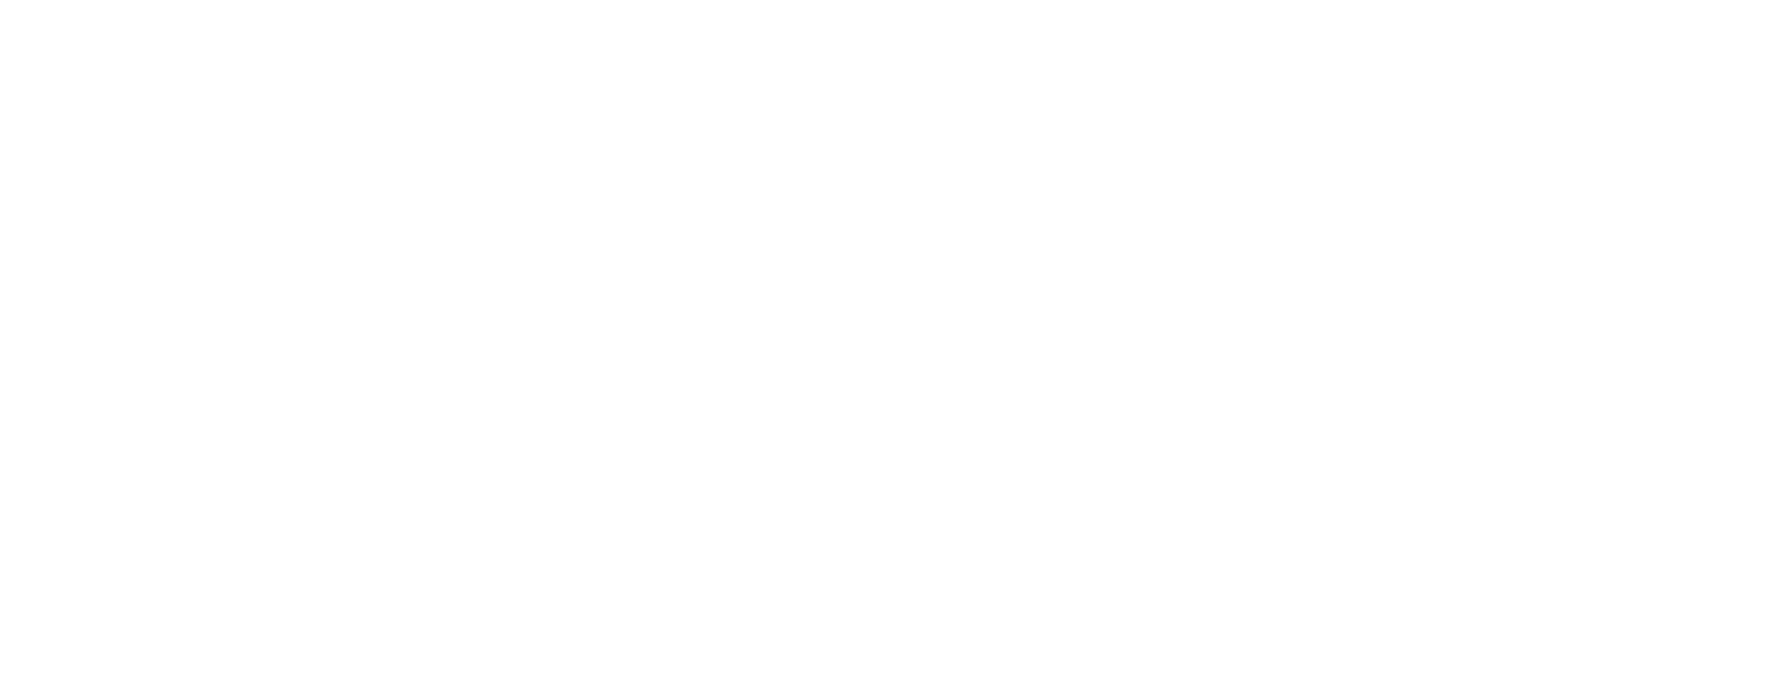 Silos Baking Competition: Holiday Edition logo